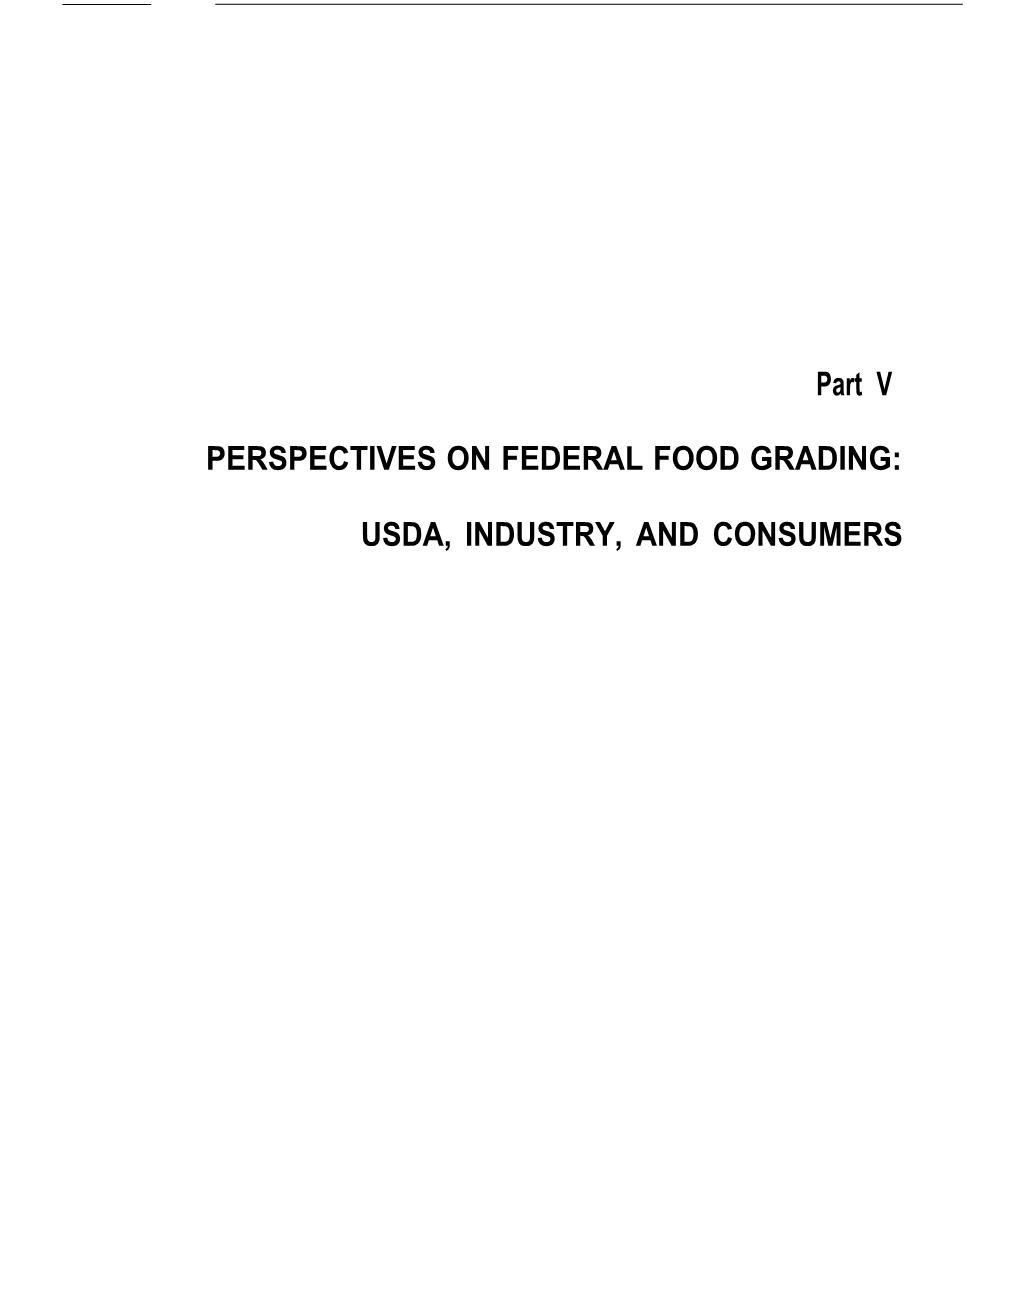 Perspectives on Federal Retail Food Grading